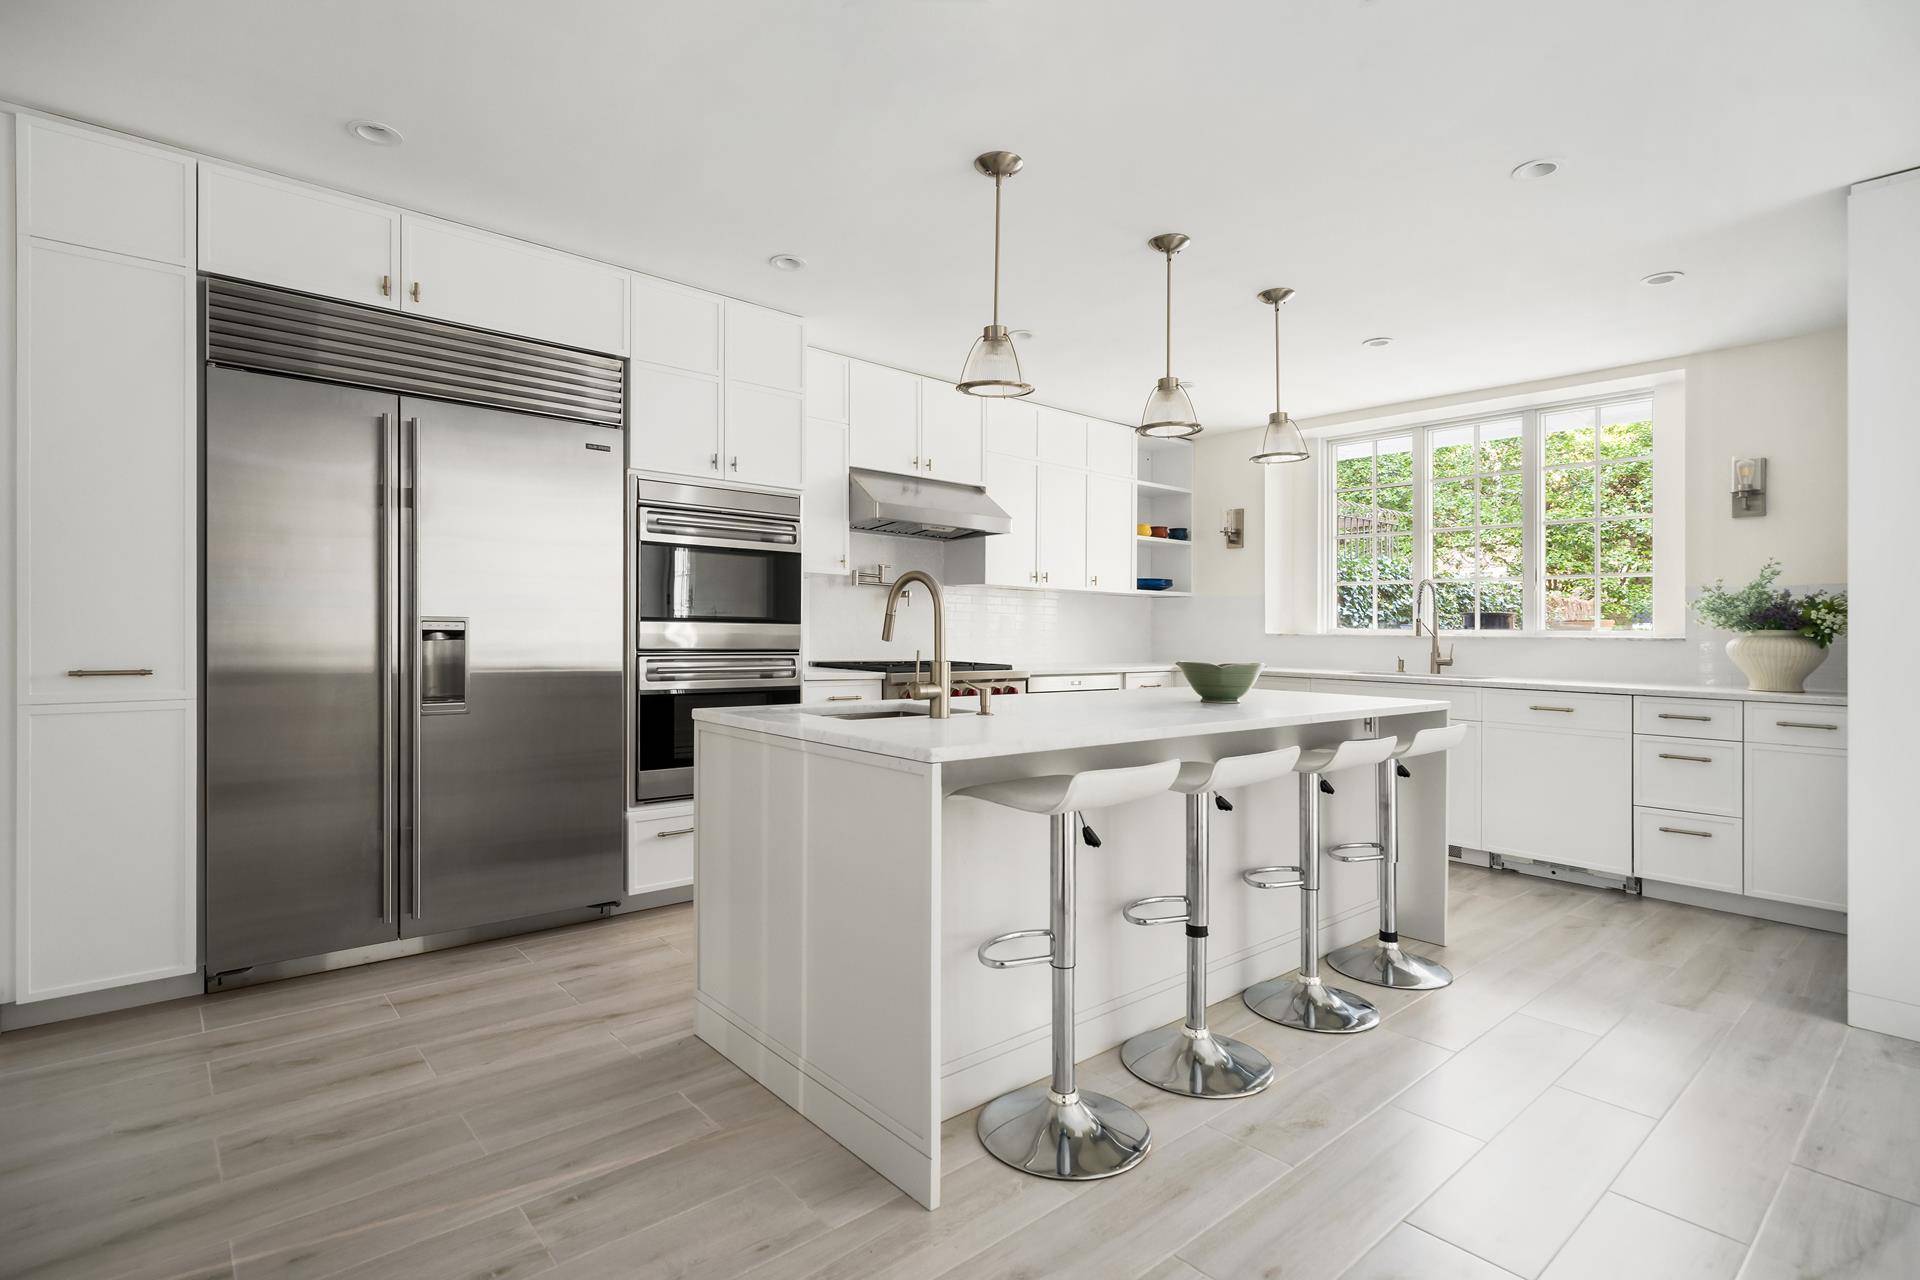 324 West 80th Street represents a rare opportunity to purchase a newly renovated 24 foot wide limestone elevator townhouse on one of the most beautiful residential blocks on the Upper ...